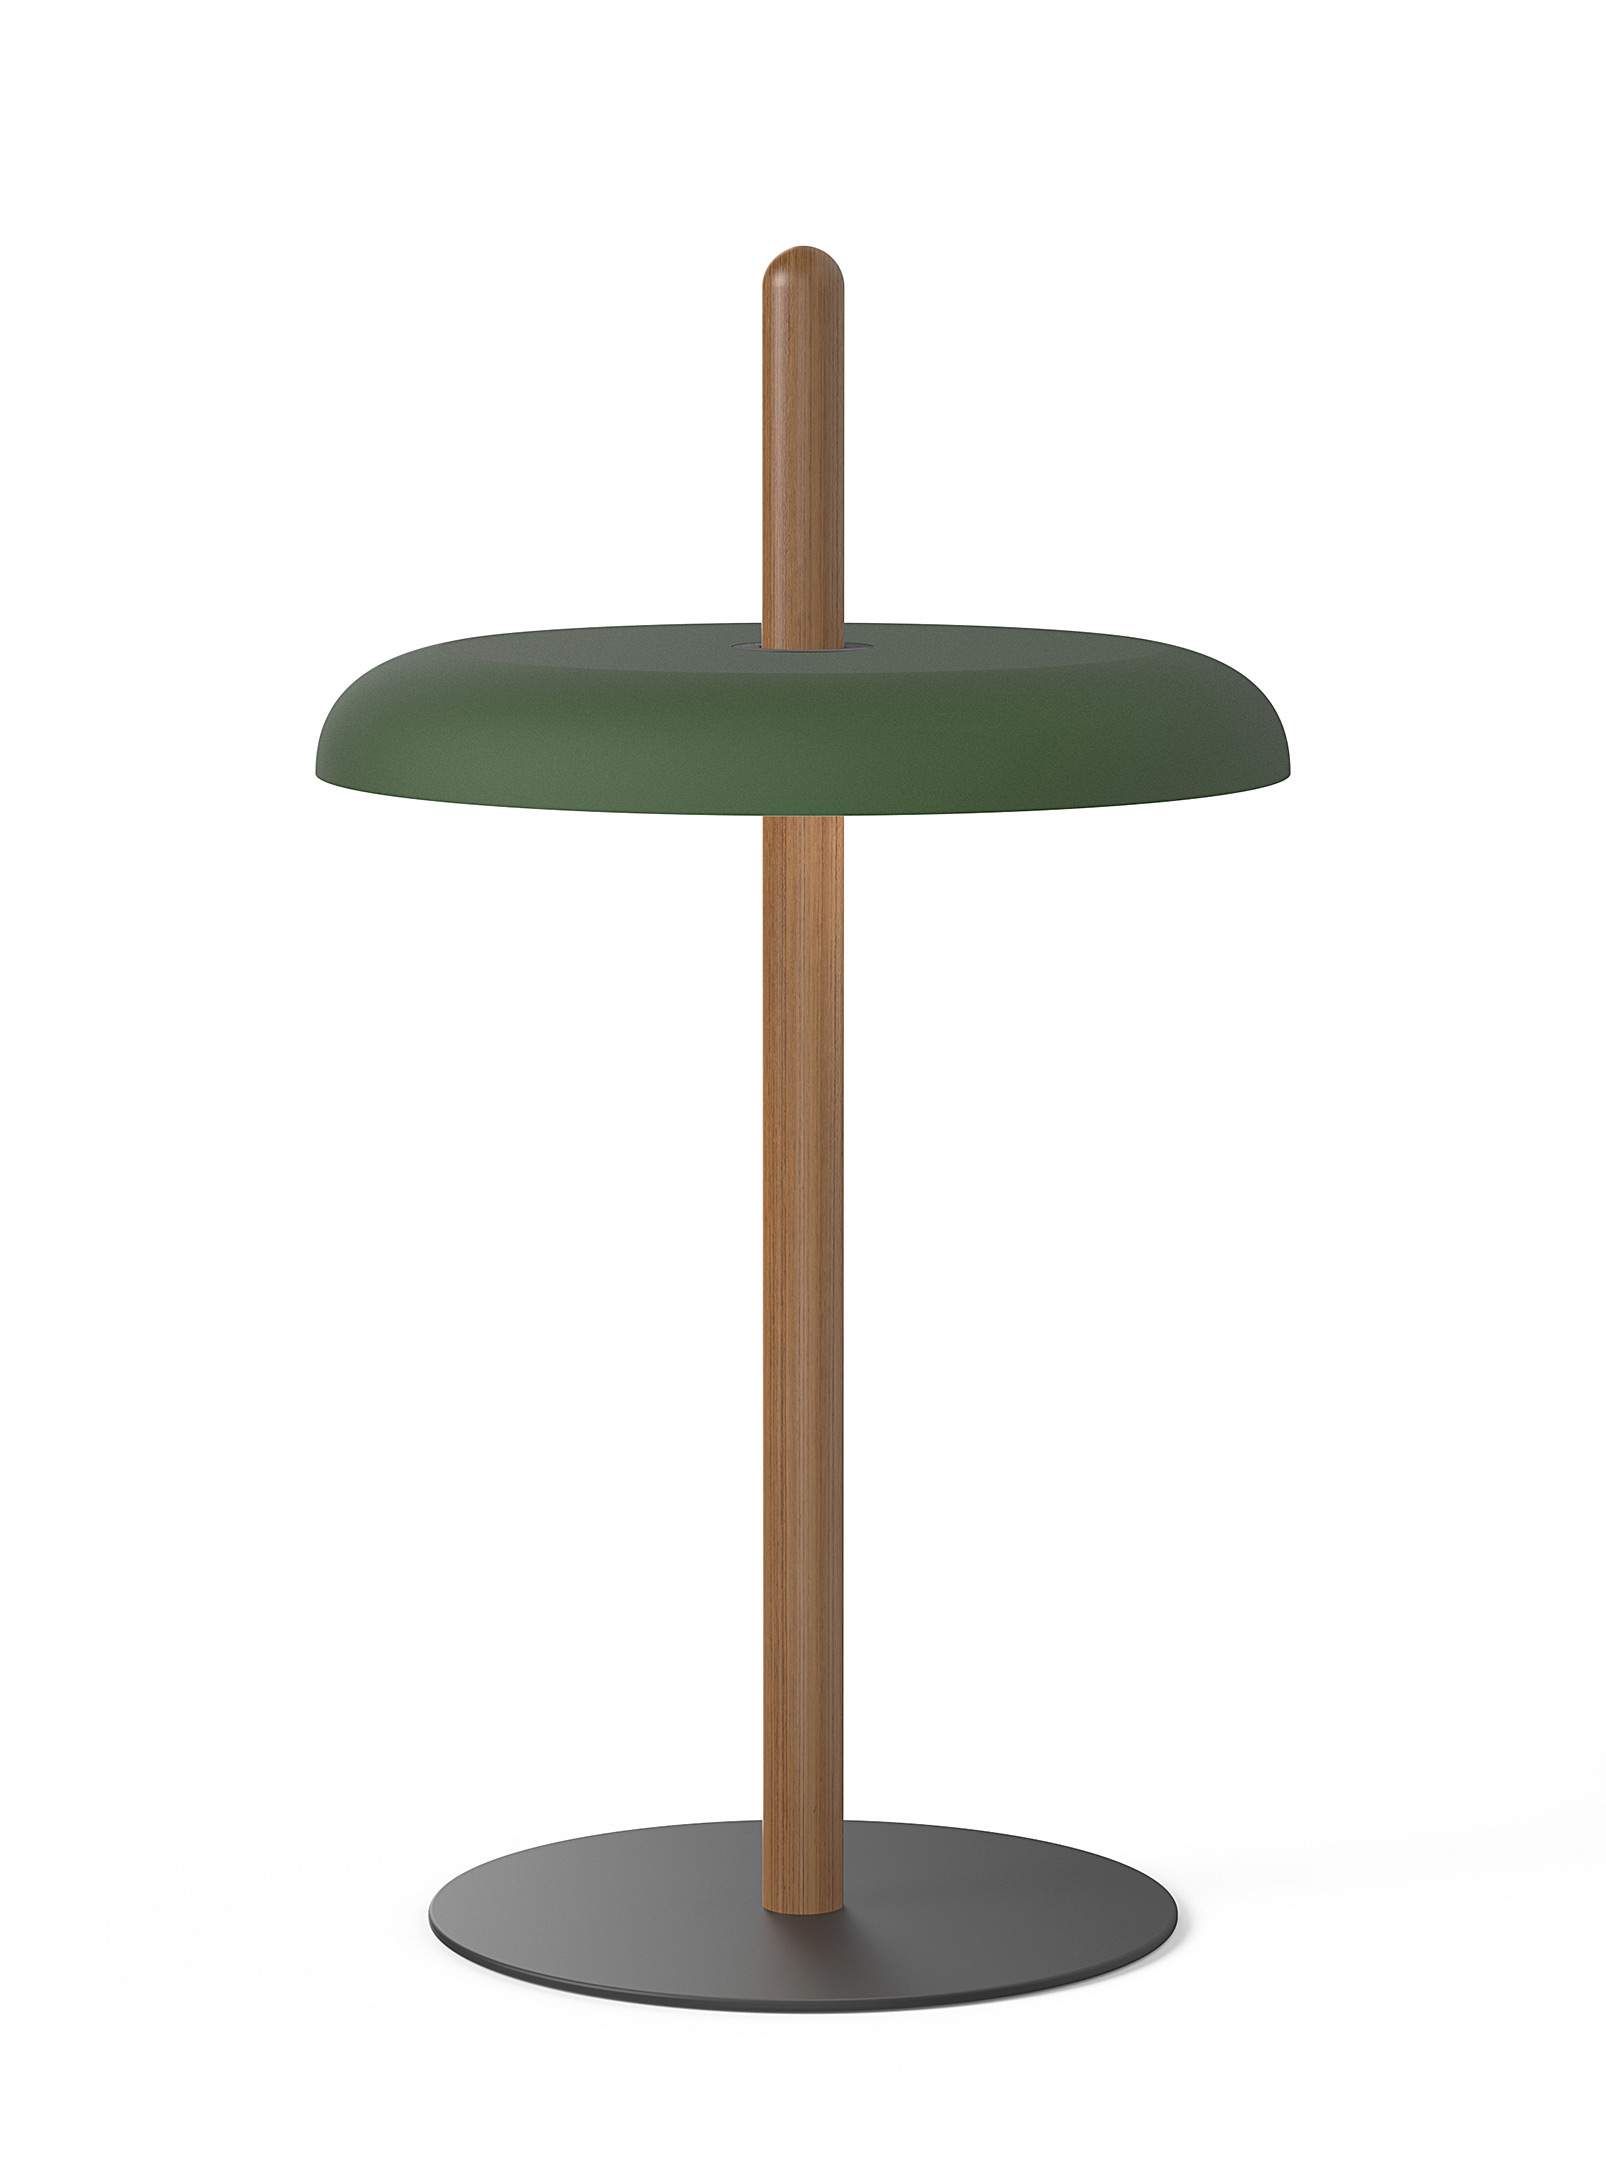 Pablo Designs Nivél Table Lamp With Solid Walnut Pole In Green